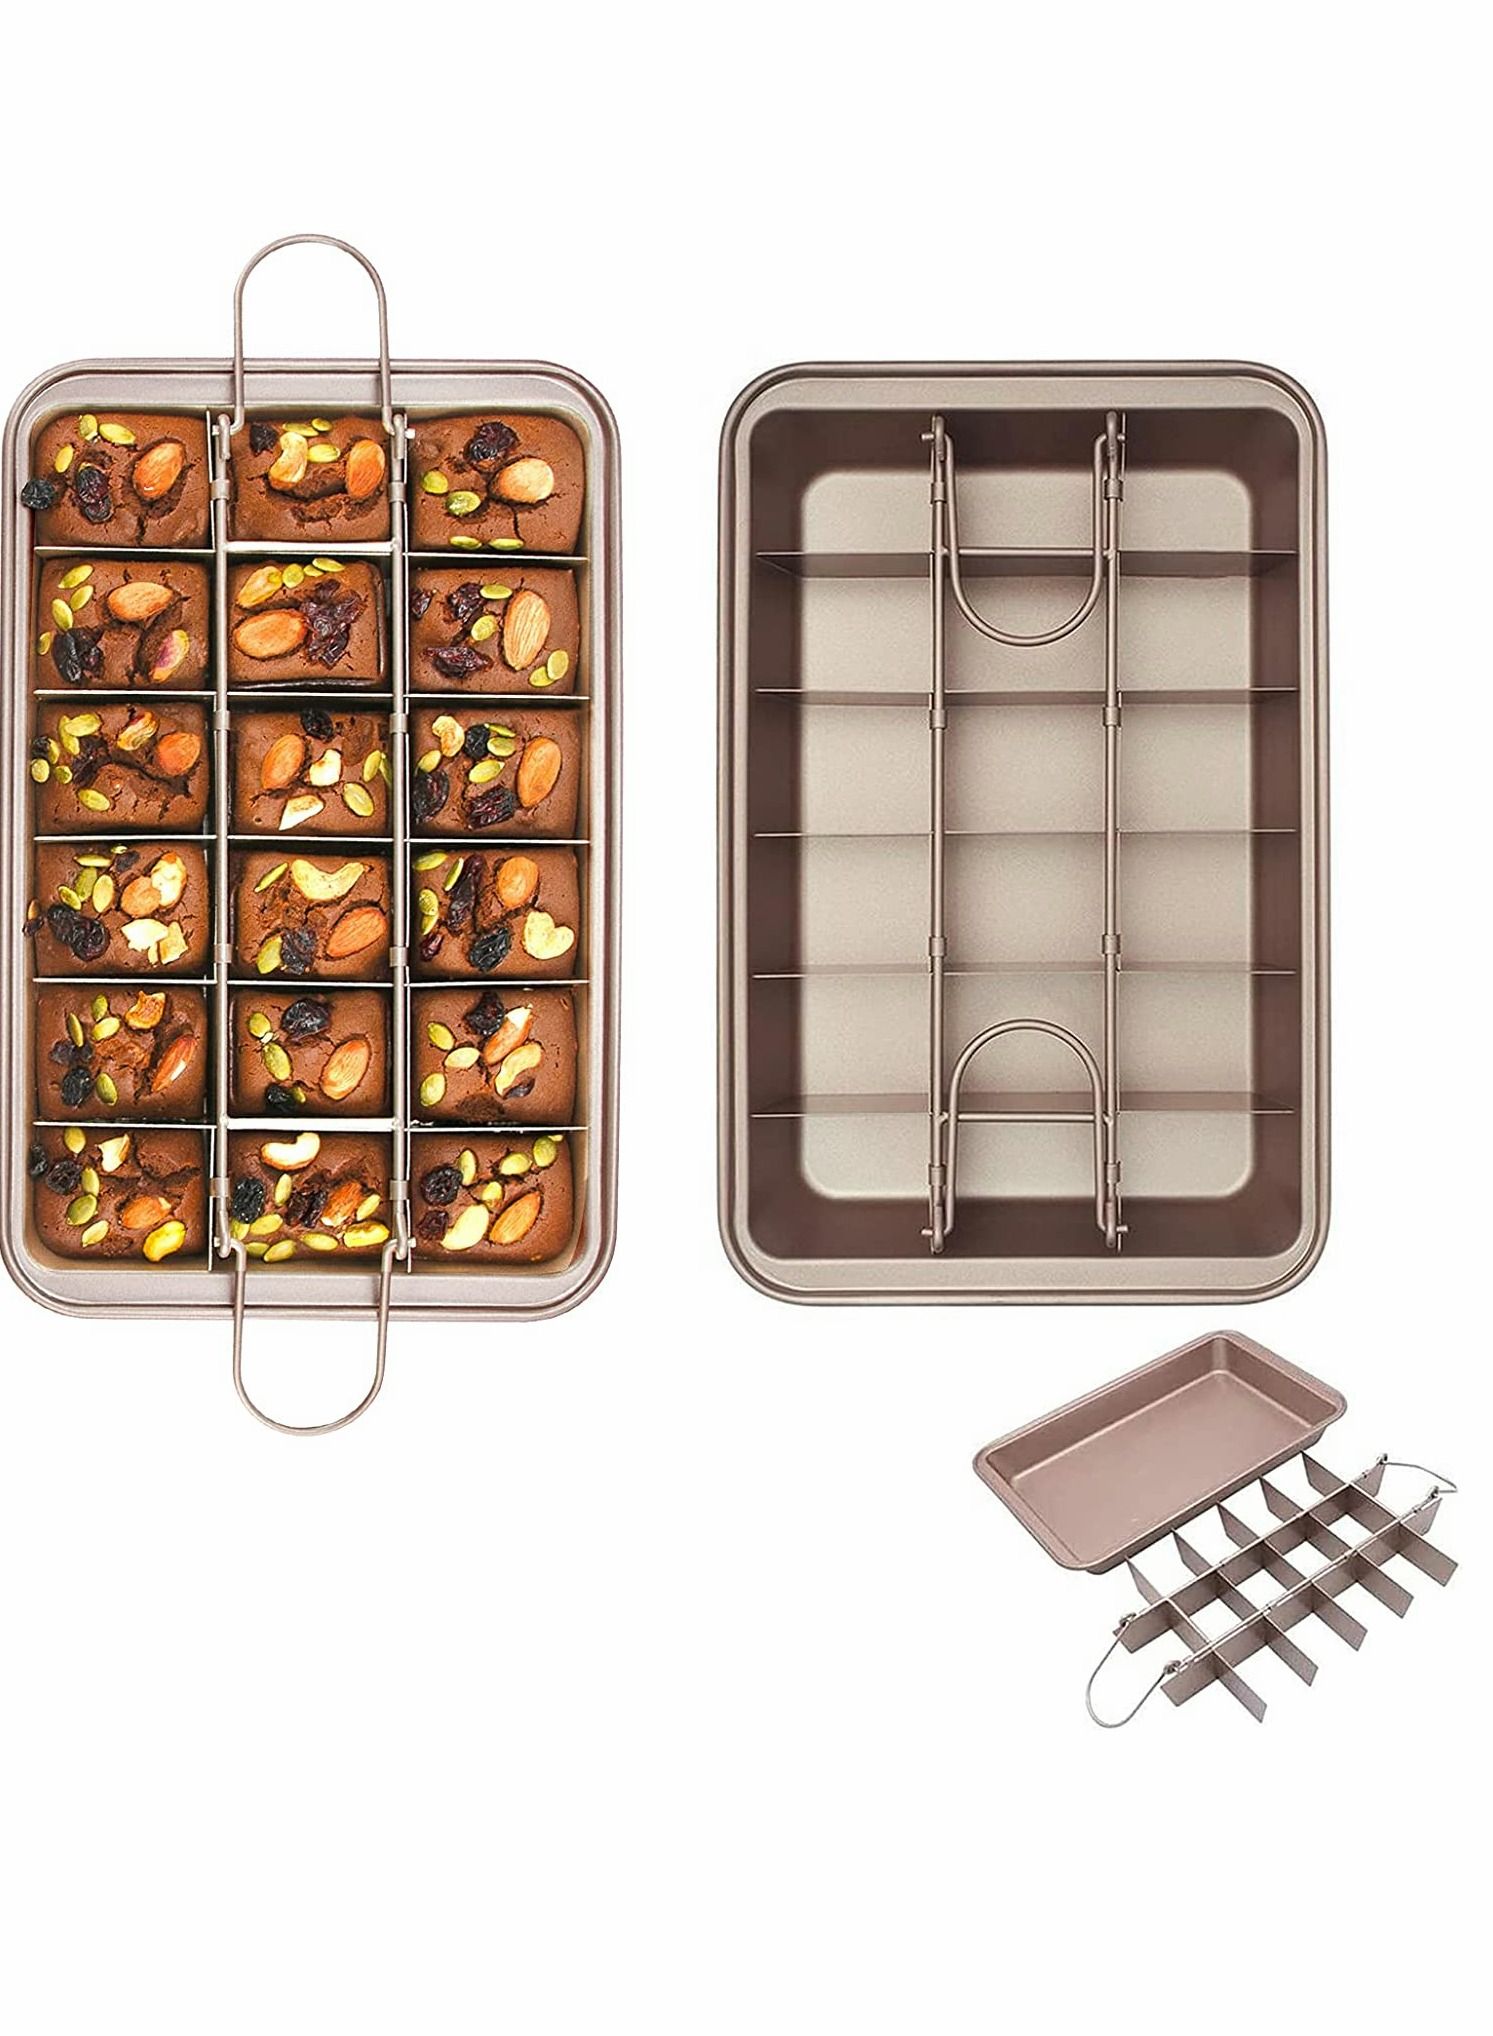 Buy SHOAIB Brownie Baking Tray, 12cavity Brownie Muffins Tray, Carbon Steel  Square Shape Muffin pan Online at Low Prices in India - Amazon.in